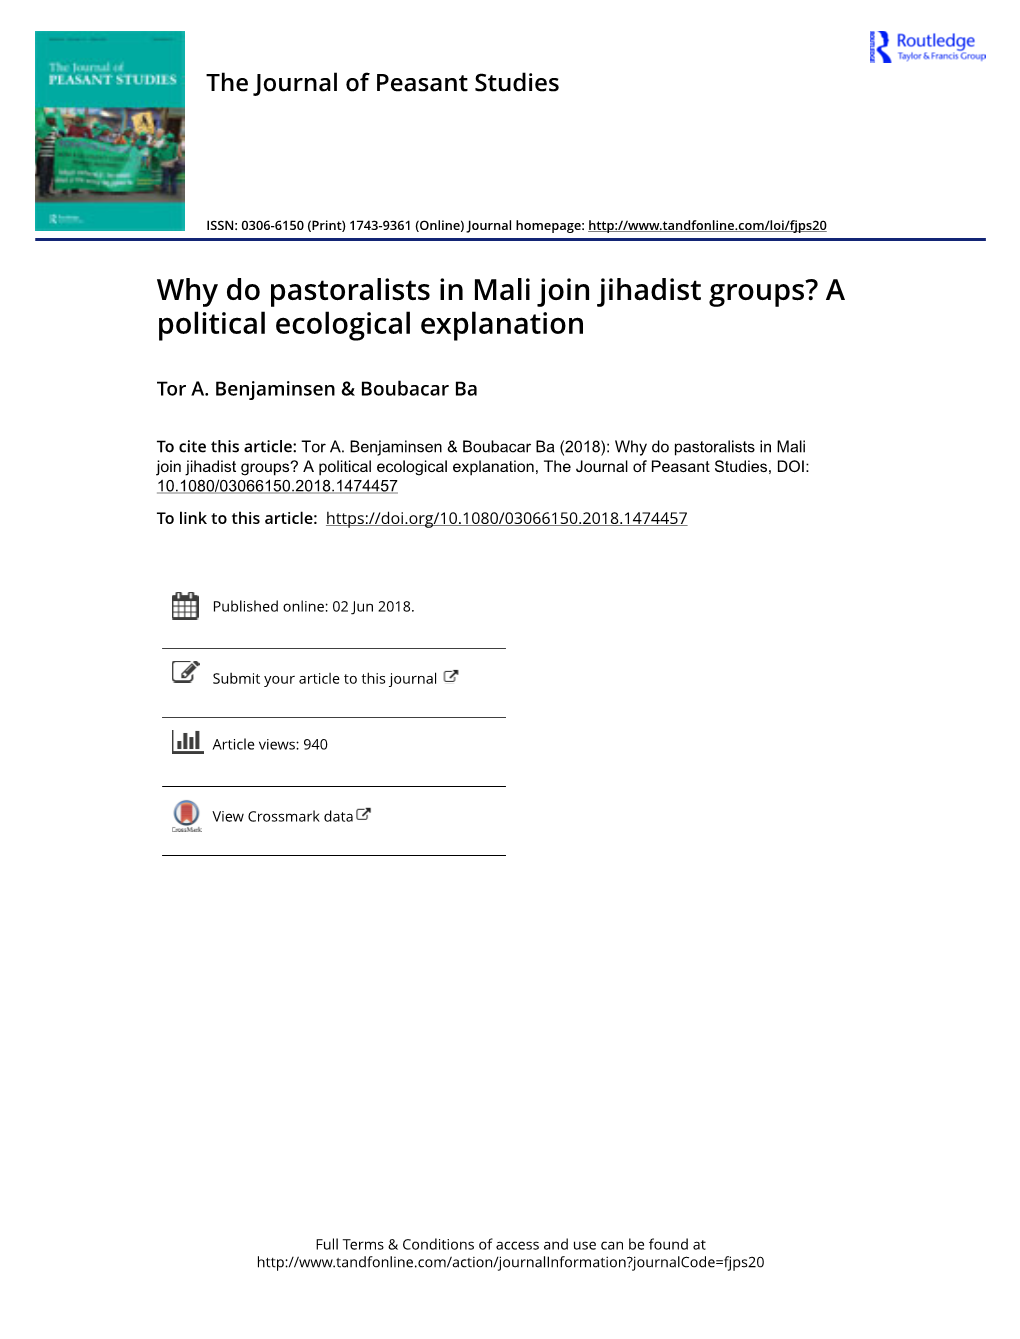 Why Do Pastoralists in Mali Join Jihadist Groups? a Political Ecological Explanation